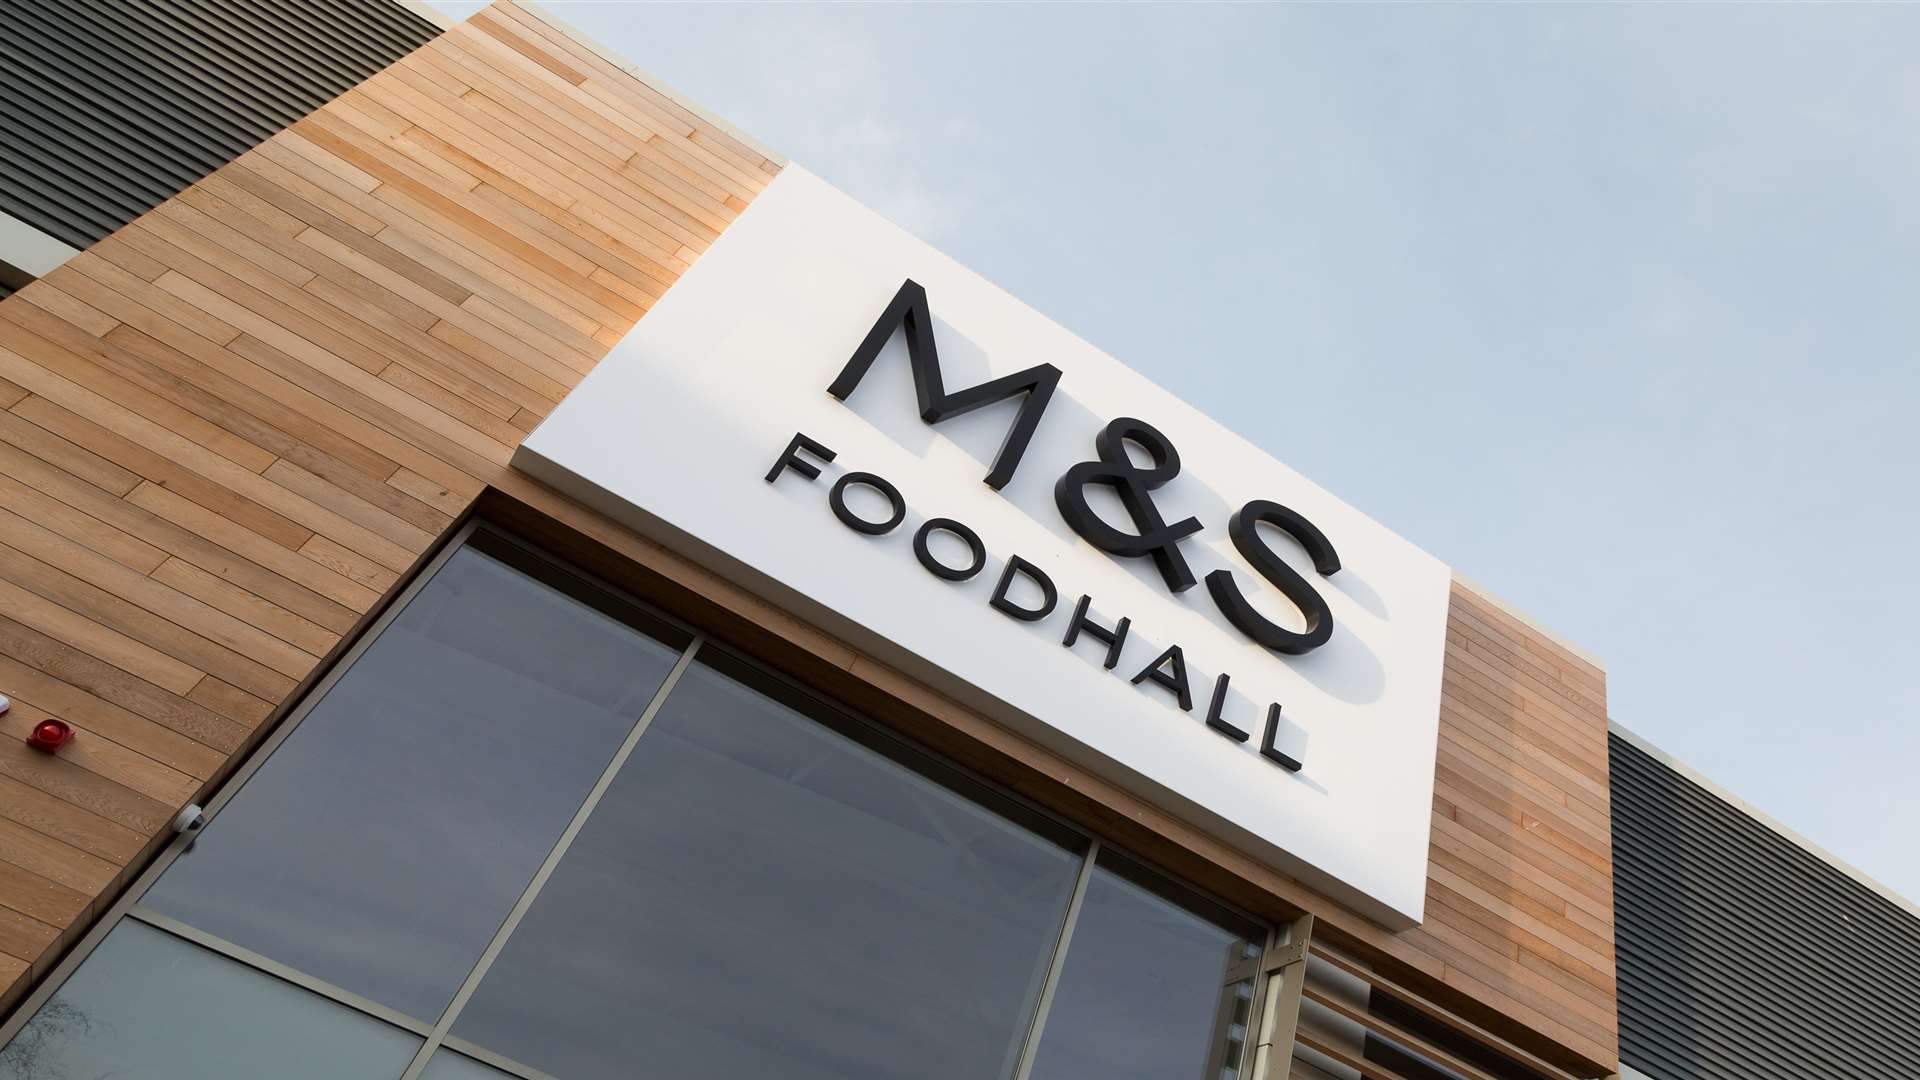 The M&S Foodhall is opening soon